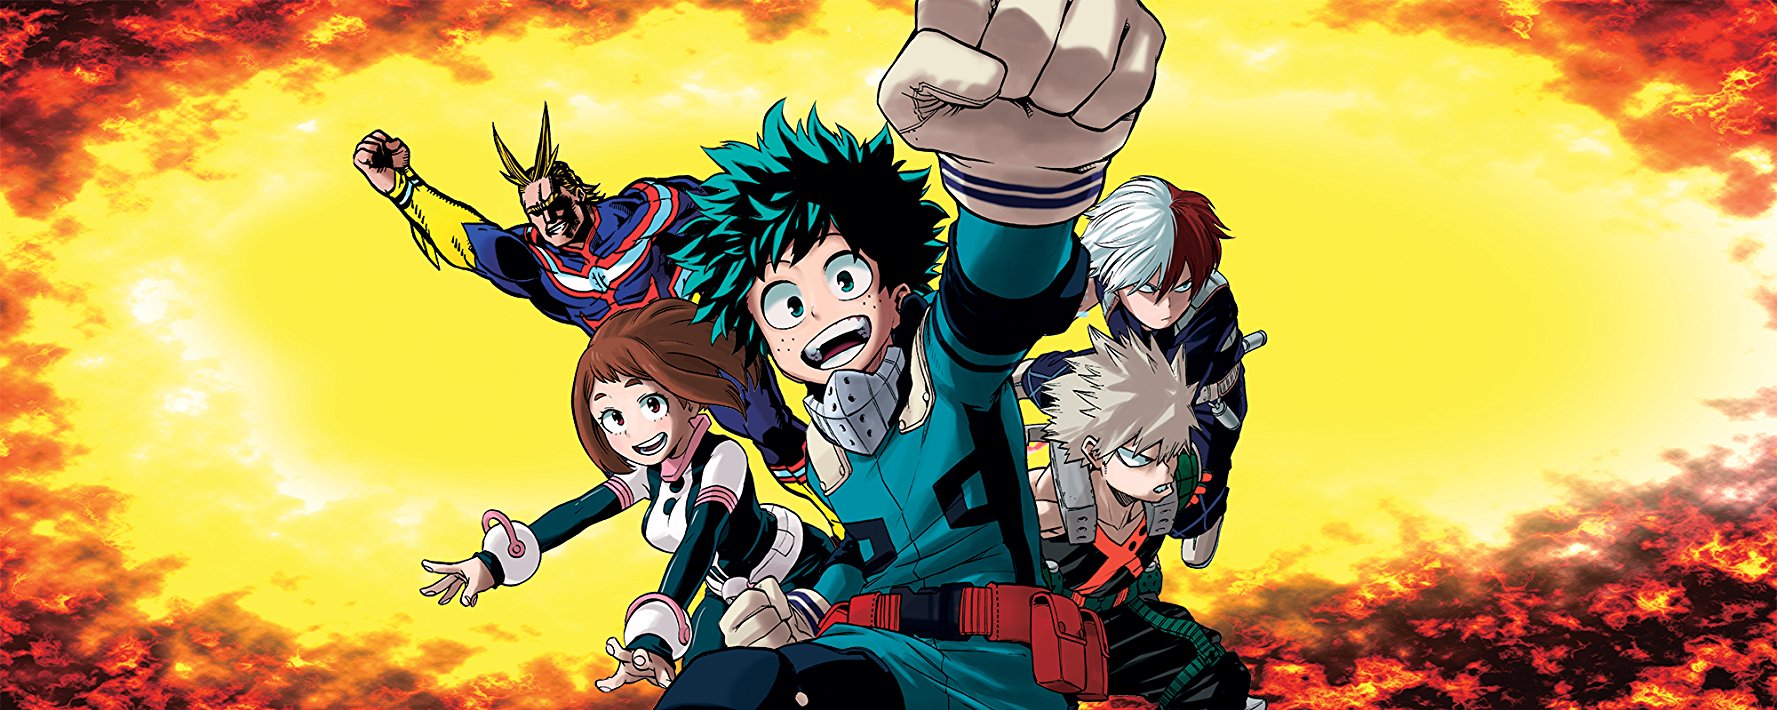 My Hero Academia Live Action Movie In The Works At Legendary Film